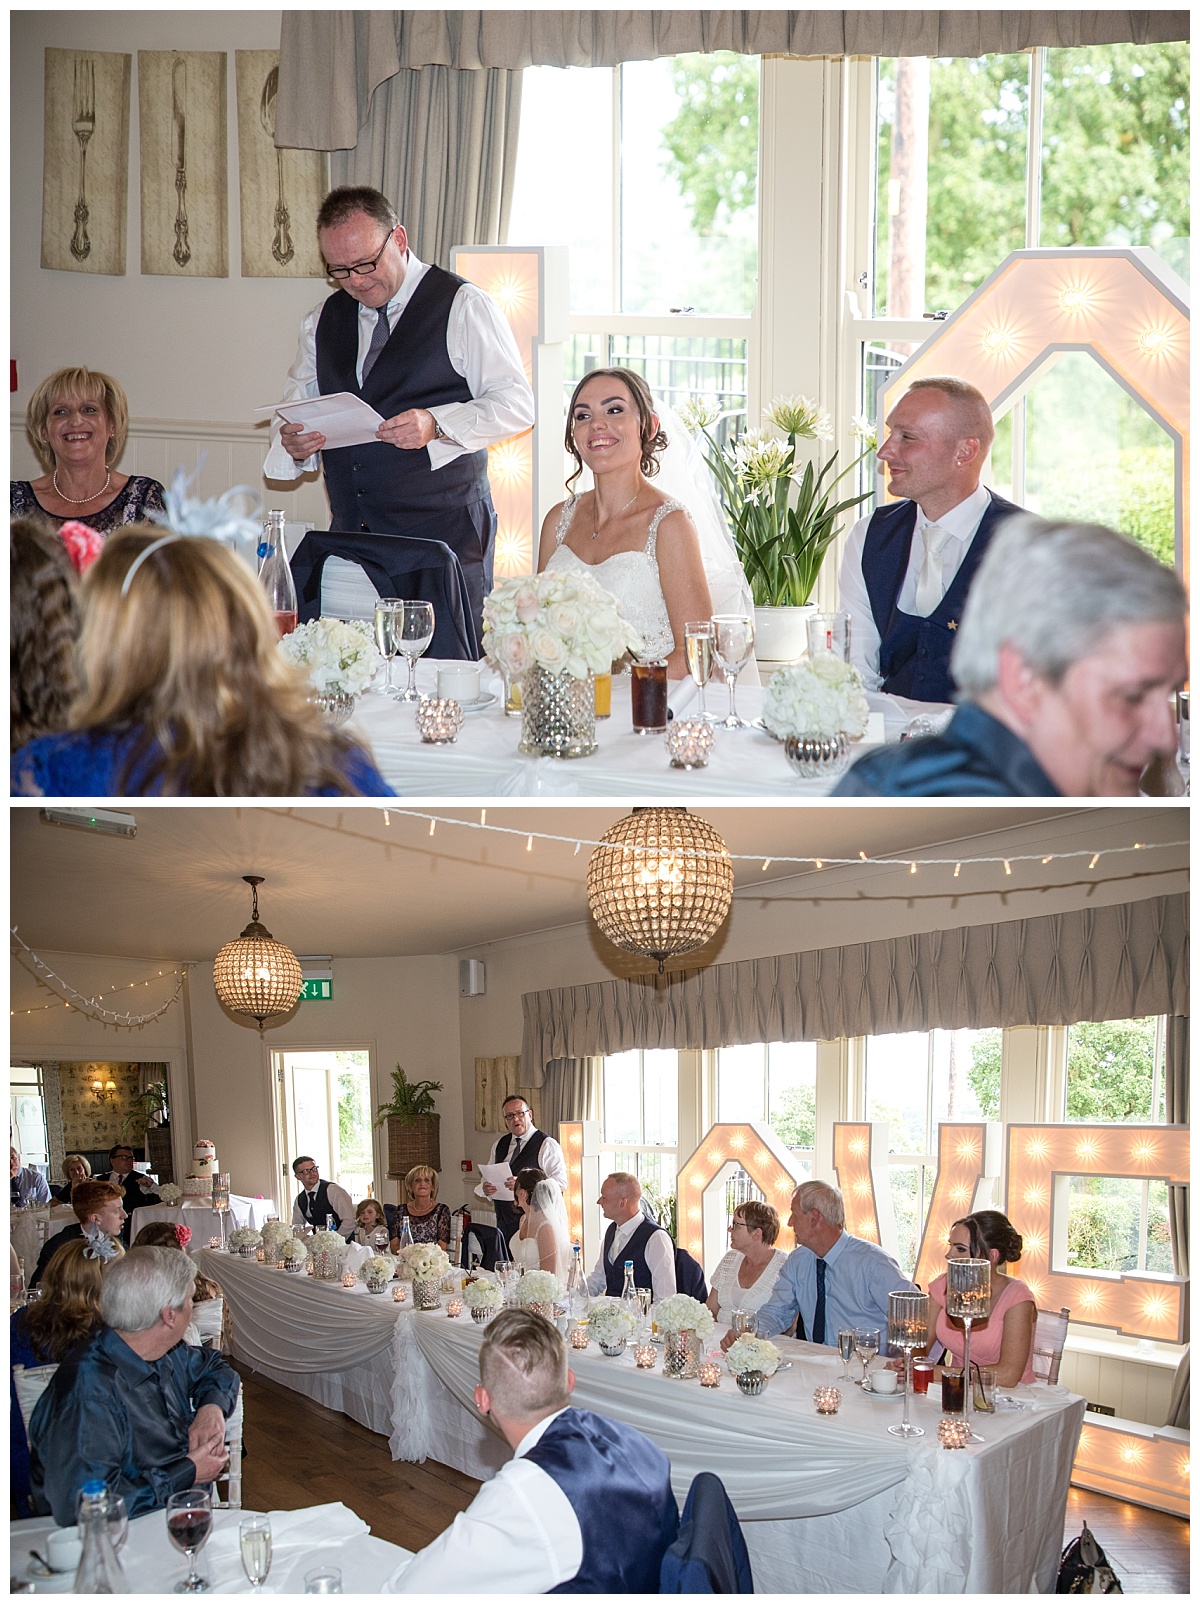 Wedding Photography Manchester - Victoria and Phillips Shireburn Arms wedding 71